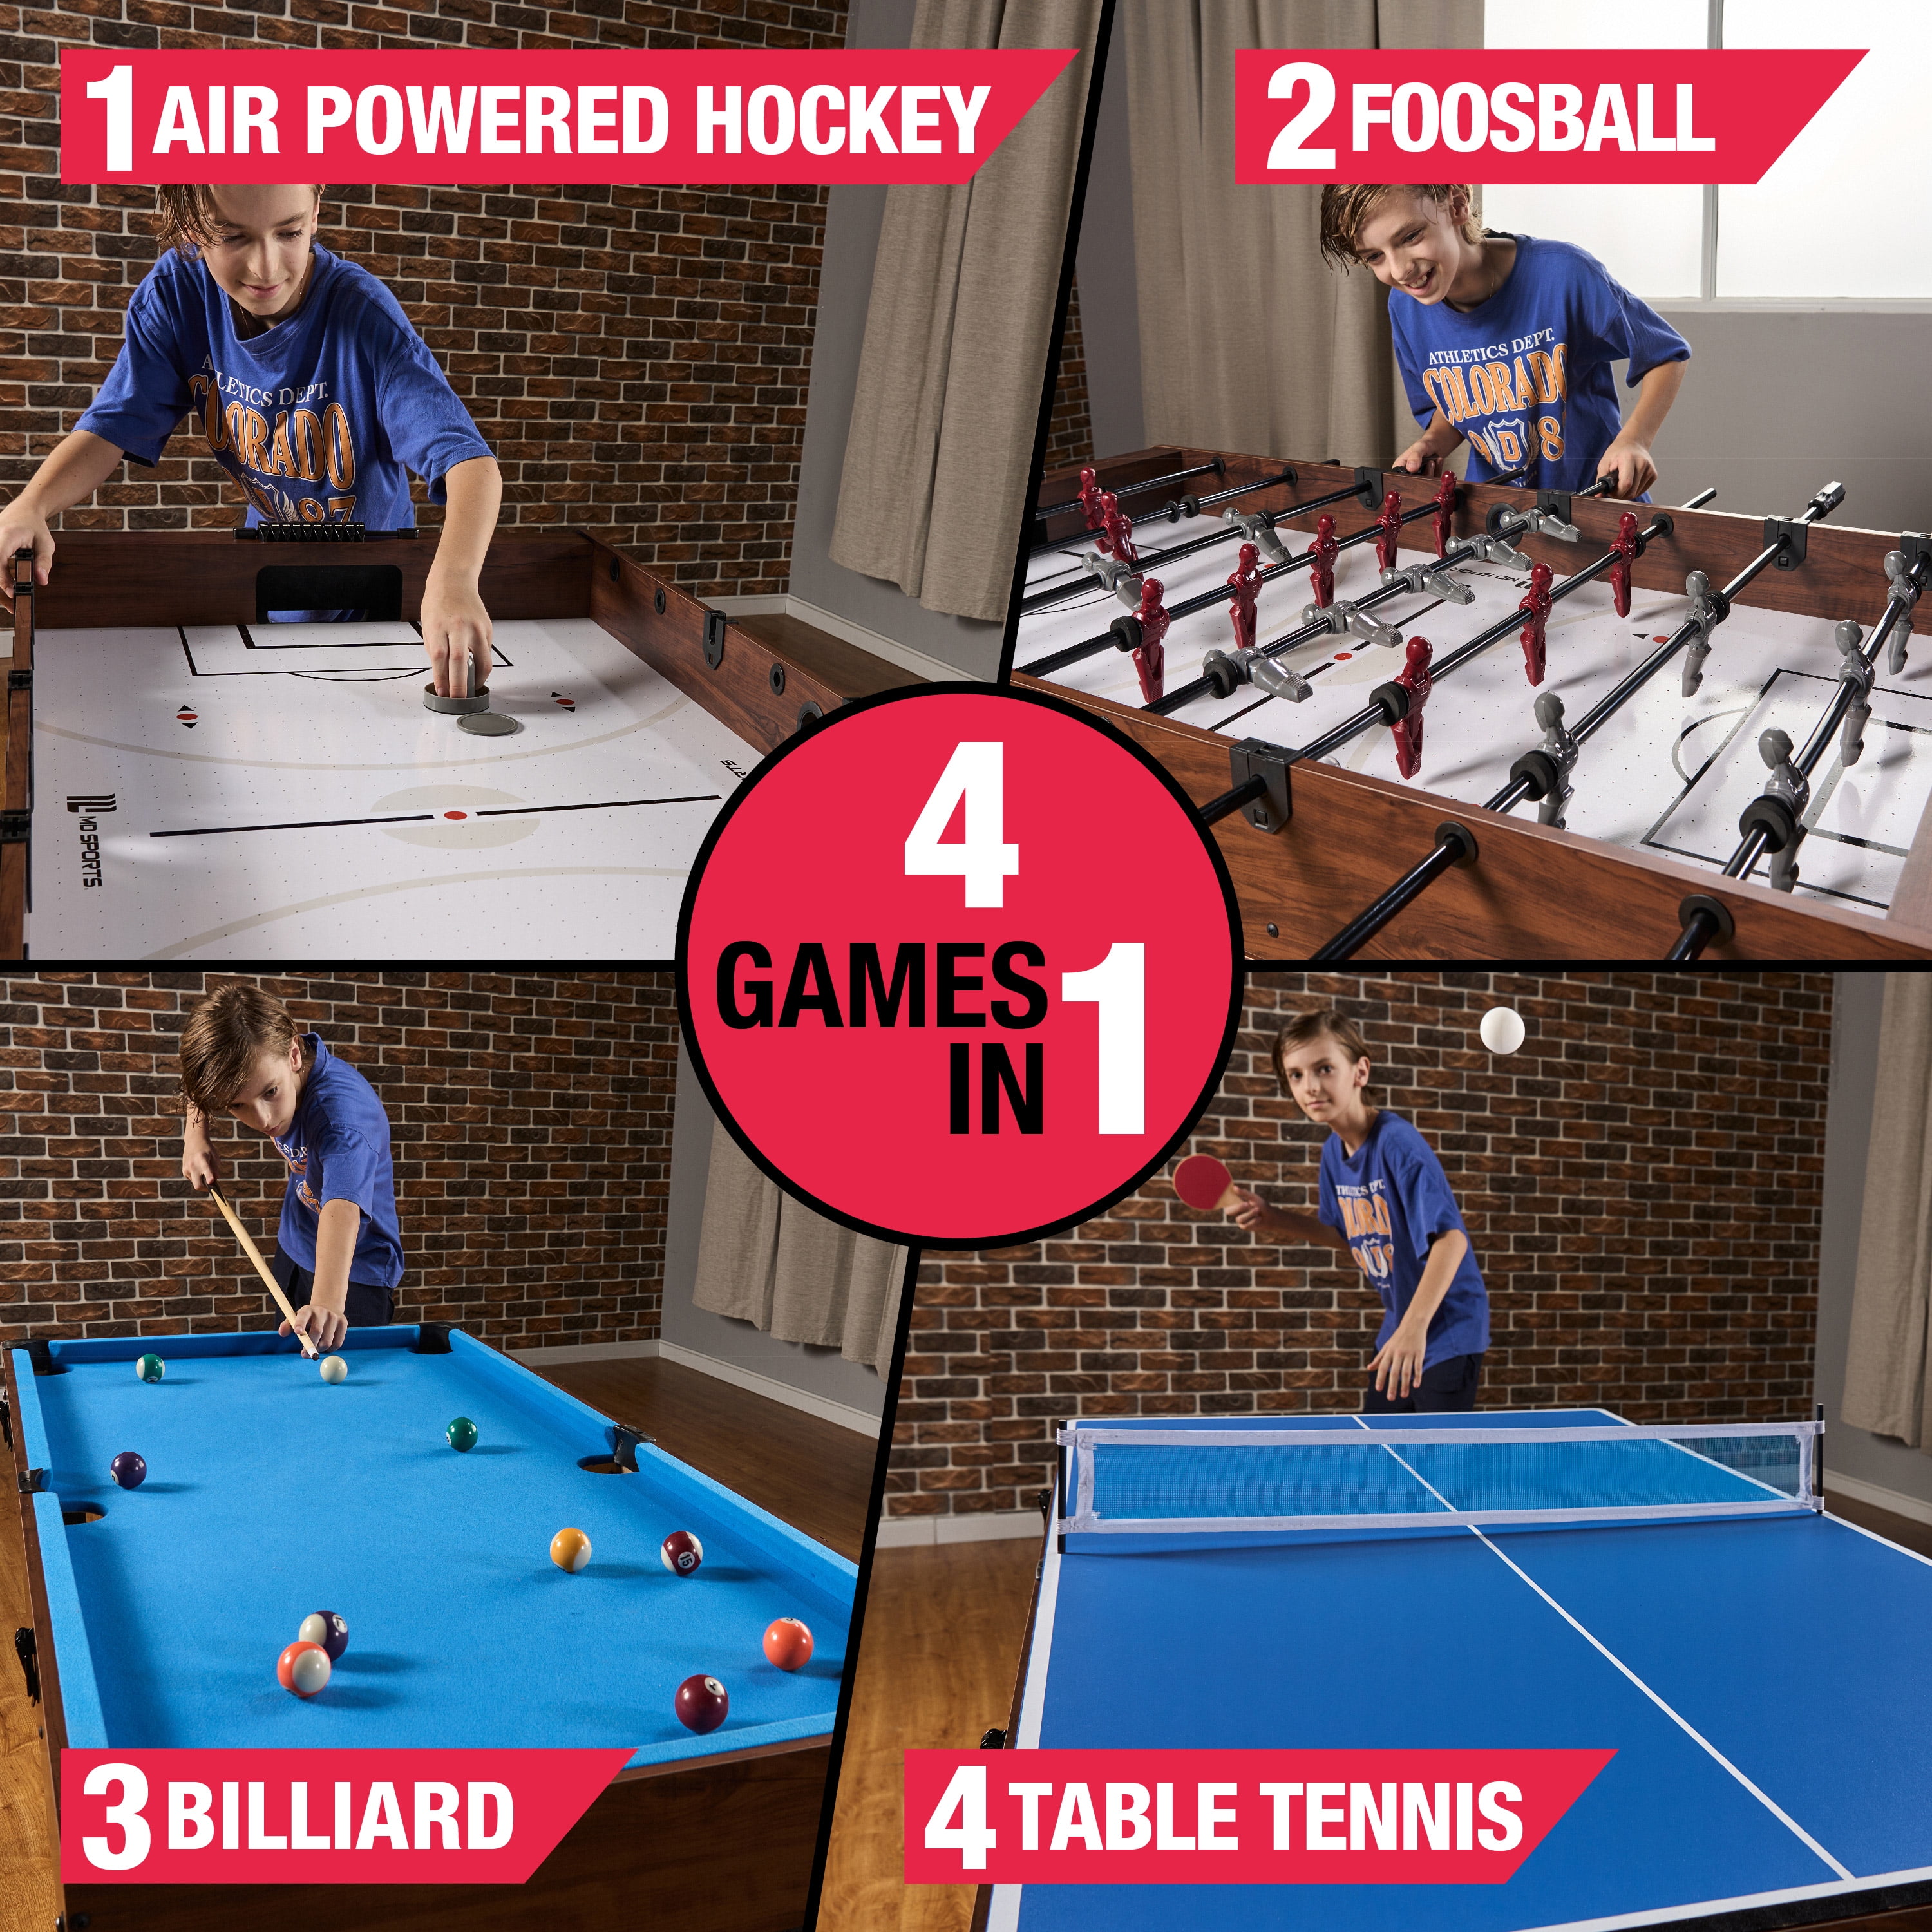 Buy Madison 54-in 6-in-1 Multi Game Table on Pool and Spa Supply Store